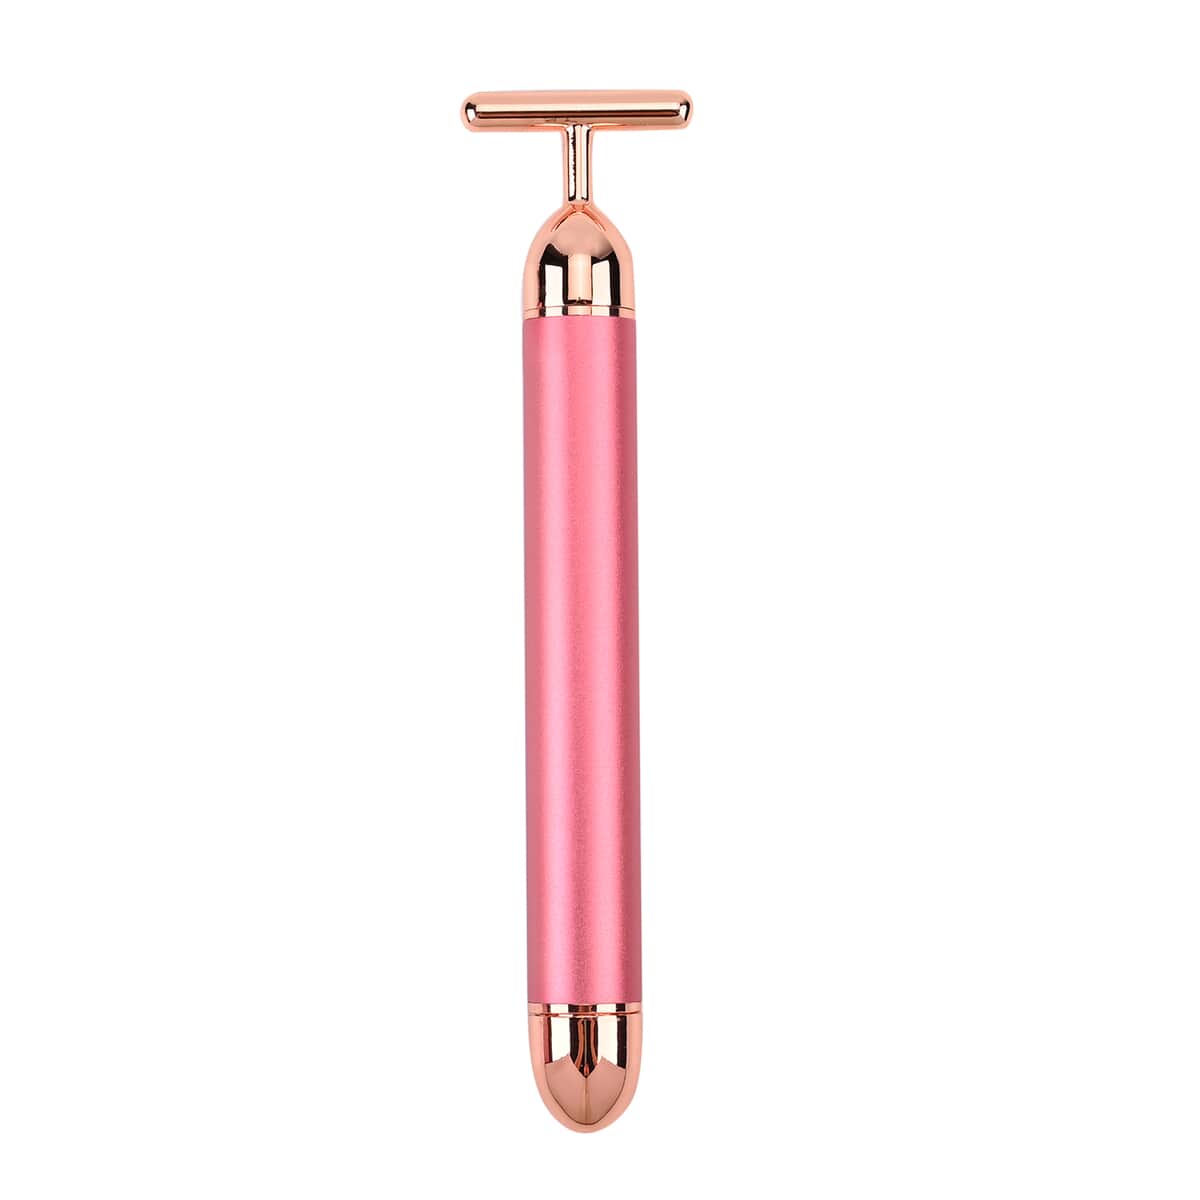 4-in-1 Face Massager Rollers with Four Interchangeable Massage Heads - Rose Gold (5.9"x1.49"), 1xAA Battery Not Including image number 3